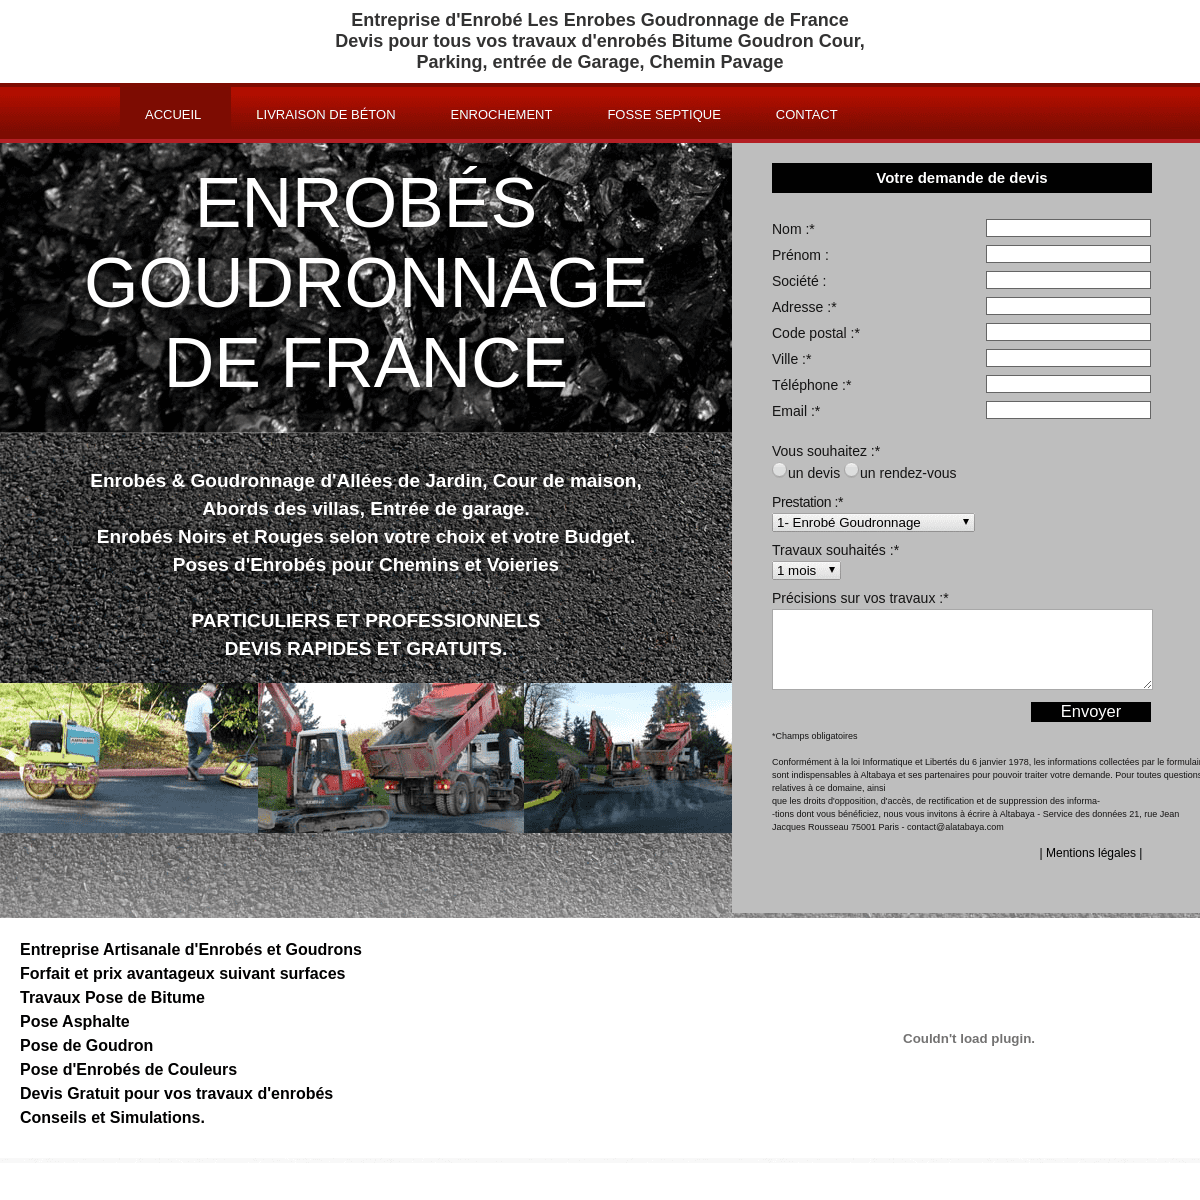 A complete backup of enrobe-goudronnage.fr